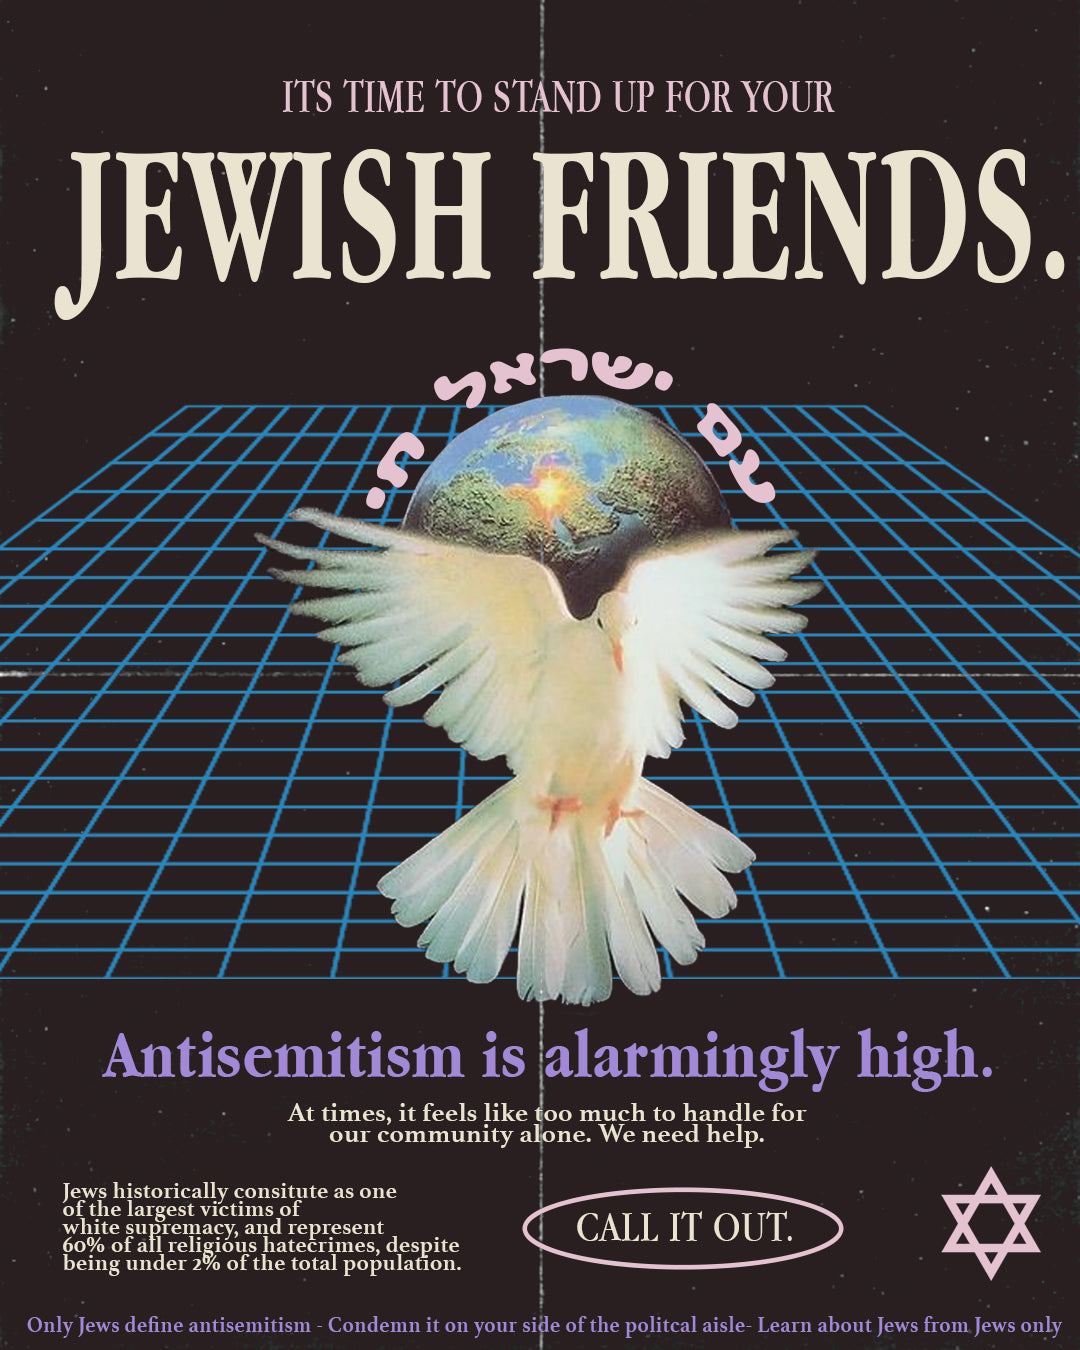 FREE PRINTABLE: "CHECK ON YOUR JEWISH FRIENDS"